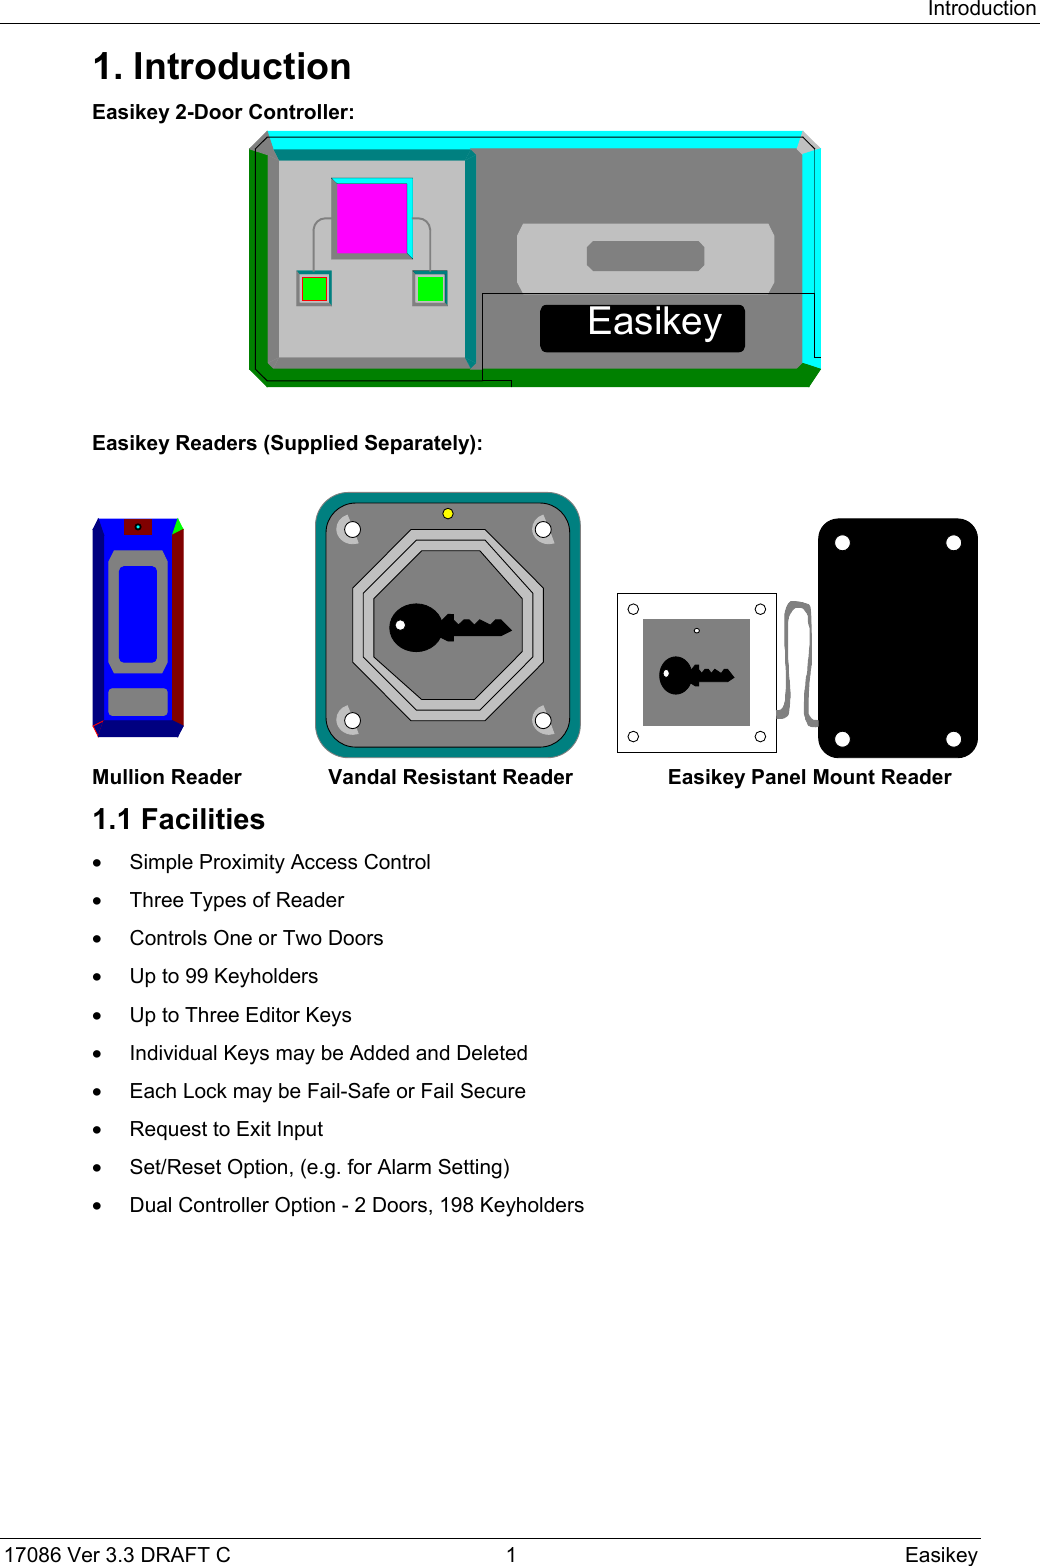 Introduction17086 Ver 3.3 DRAFT C  1 Easikey1. IntroductionEasikey 2-Door Controller:EasikeyEasikey Readers (Supplied Separately):Mullion Reader Vandal Resistant Reader Easikey Panel Mount Reader1.1 Facilities•  Simple Proximity Access Control•  Three Types of Reader•  Controls One or Two Doors•  Up to 99 Keyholders•  Up to Three Editor Keys•  Individual Keys may be Added and Deleted•  Each Lock may be Fail-Safe or Fail Secure•  Request to Exit Input•  Set/Reset Option, (e.g. for Alarm Setting)•  Dual Controller Option - 2 Doors, 198 Keyholders